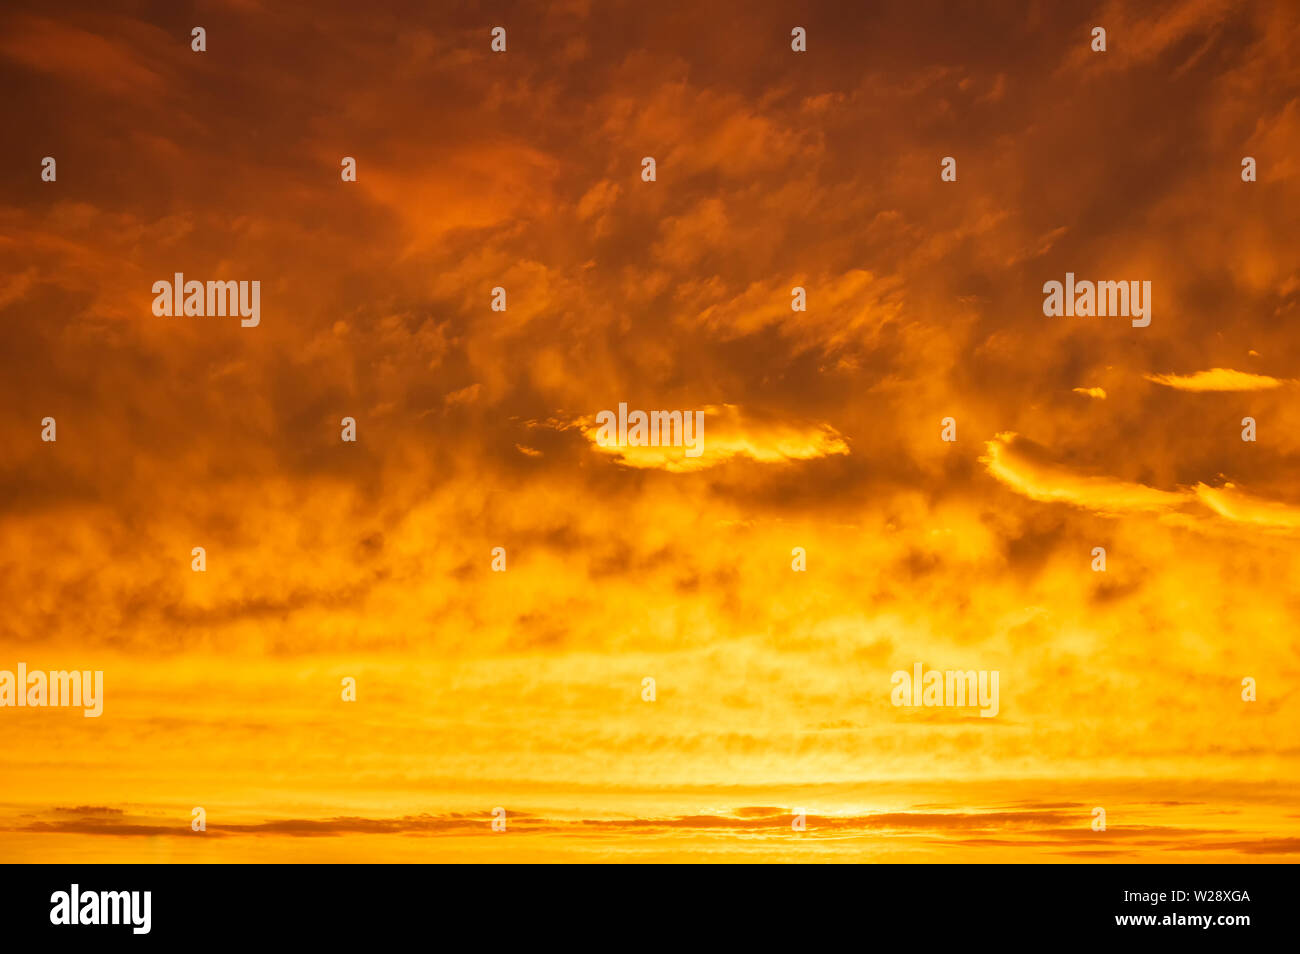 Orange sky Colorful sunset. Flaming orange clouds after rain. Abstract background. Stock Photo